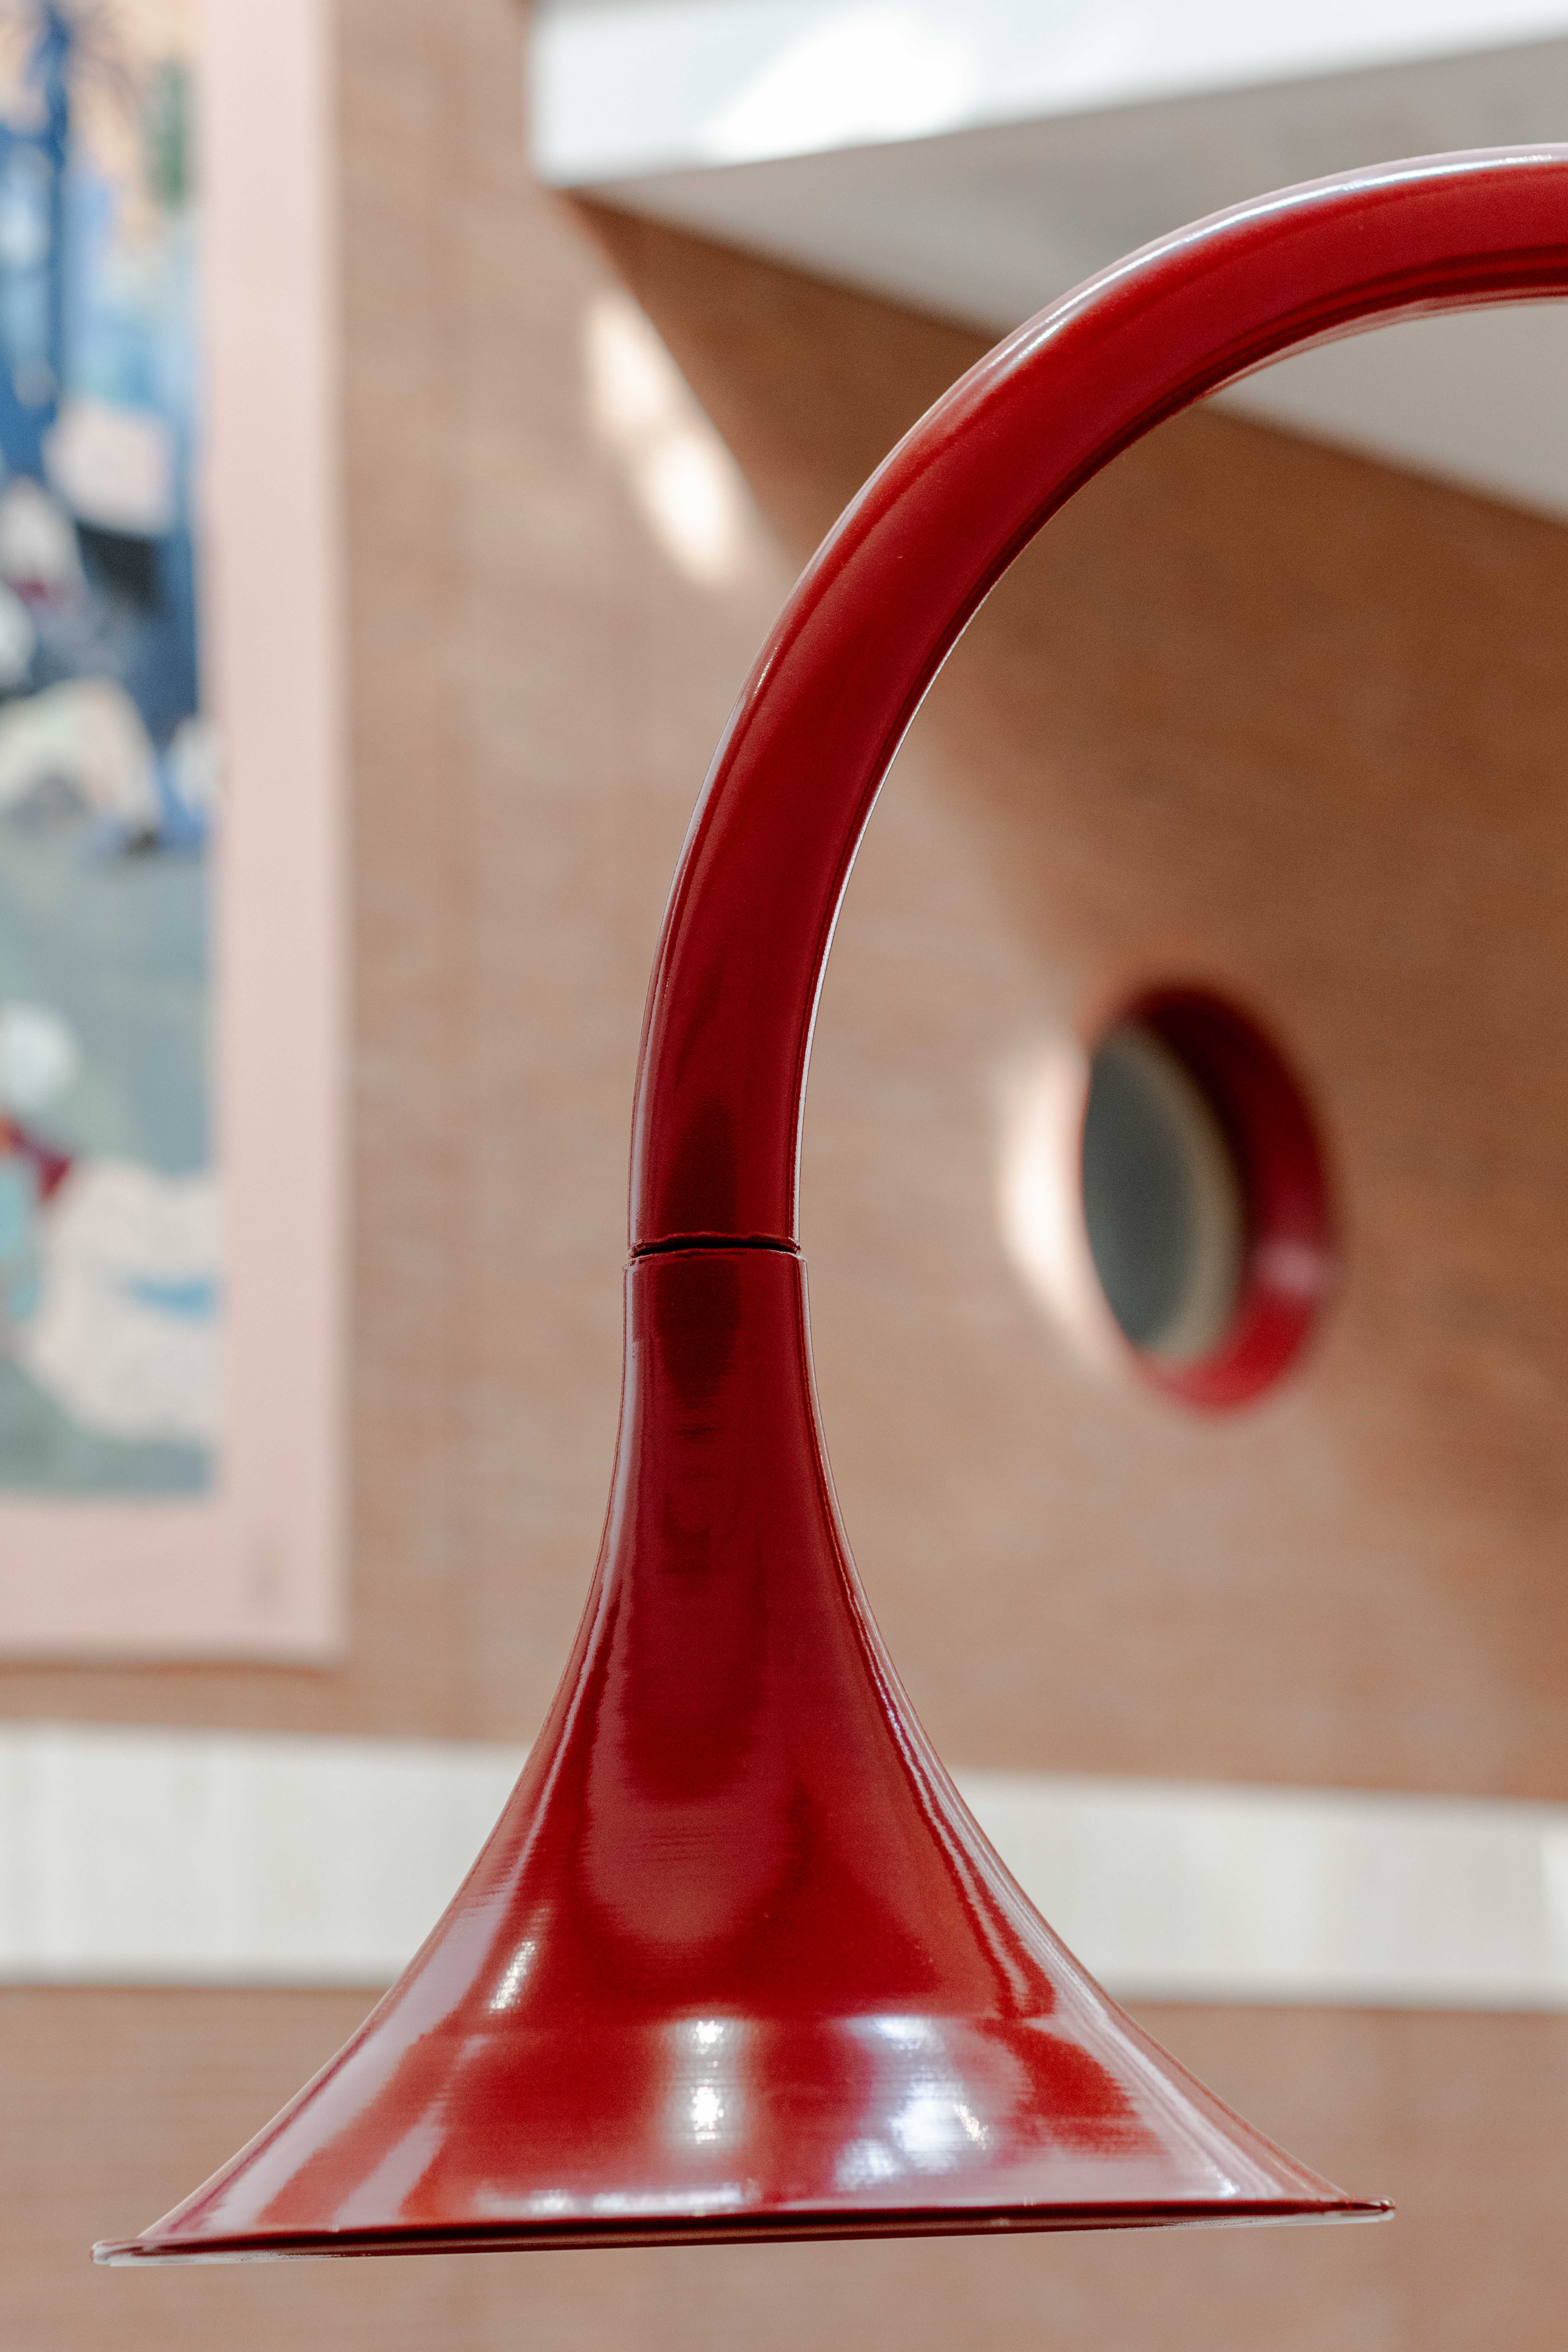 Image of Emily Peasgood's Listening Desk in The British Library. Close up of the listening horn.